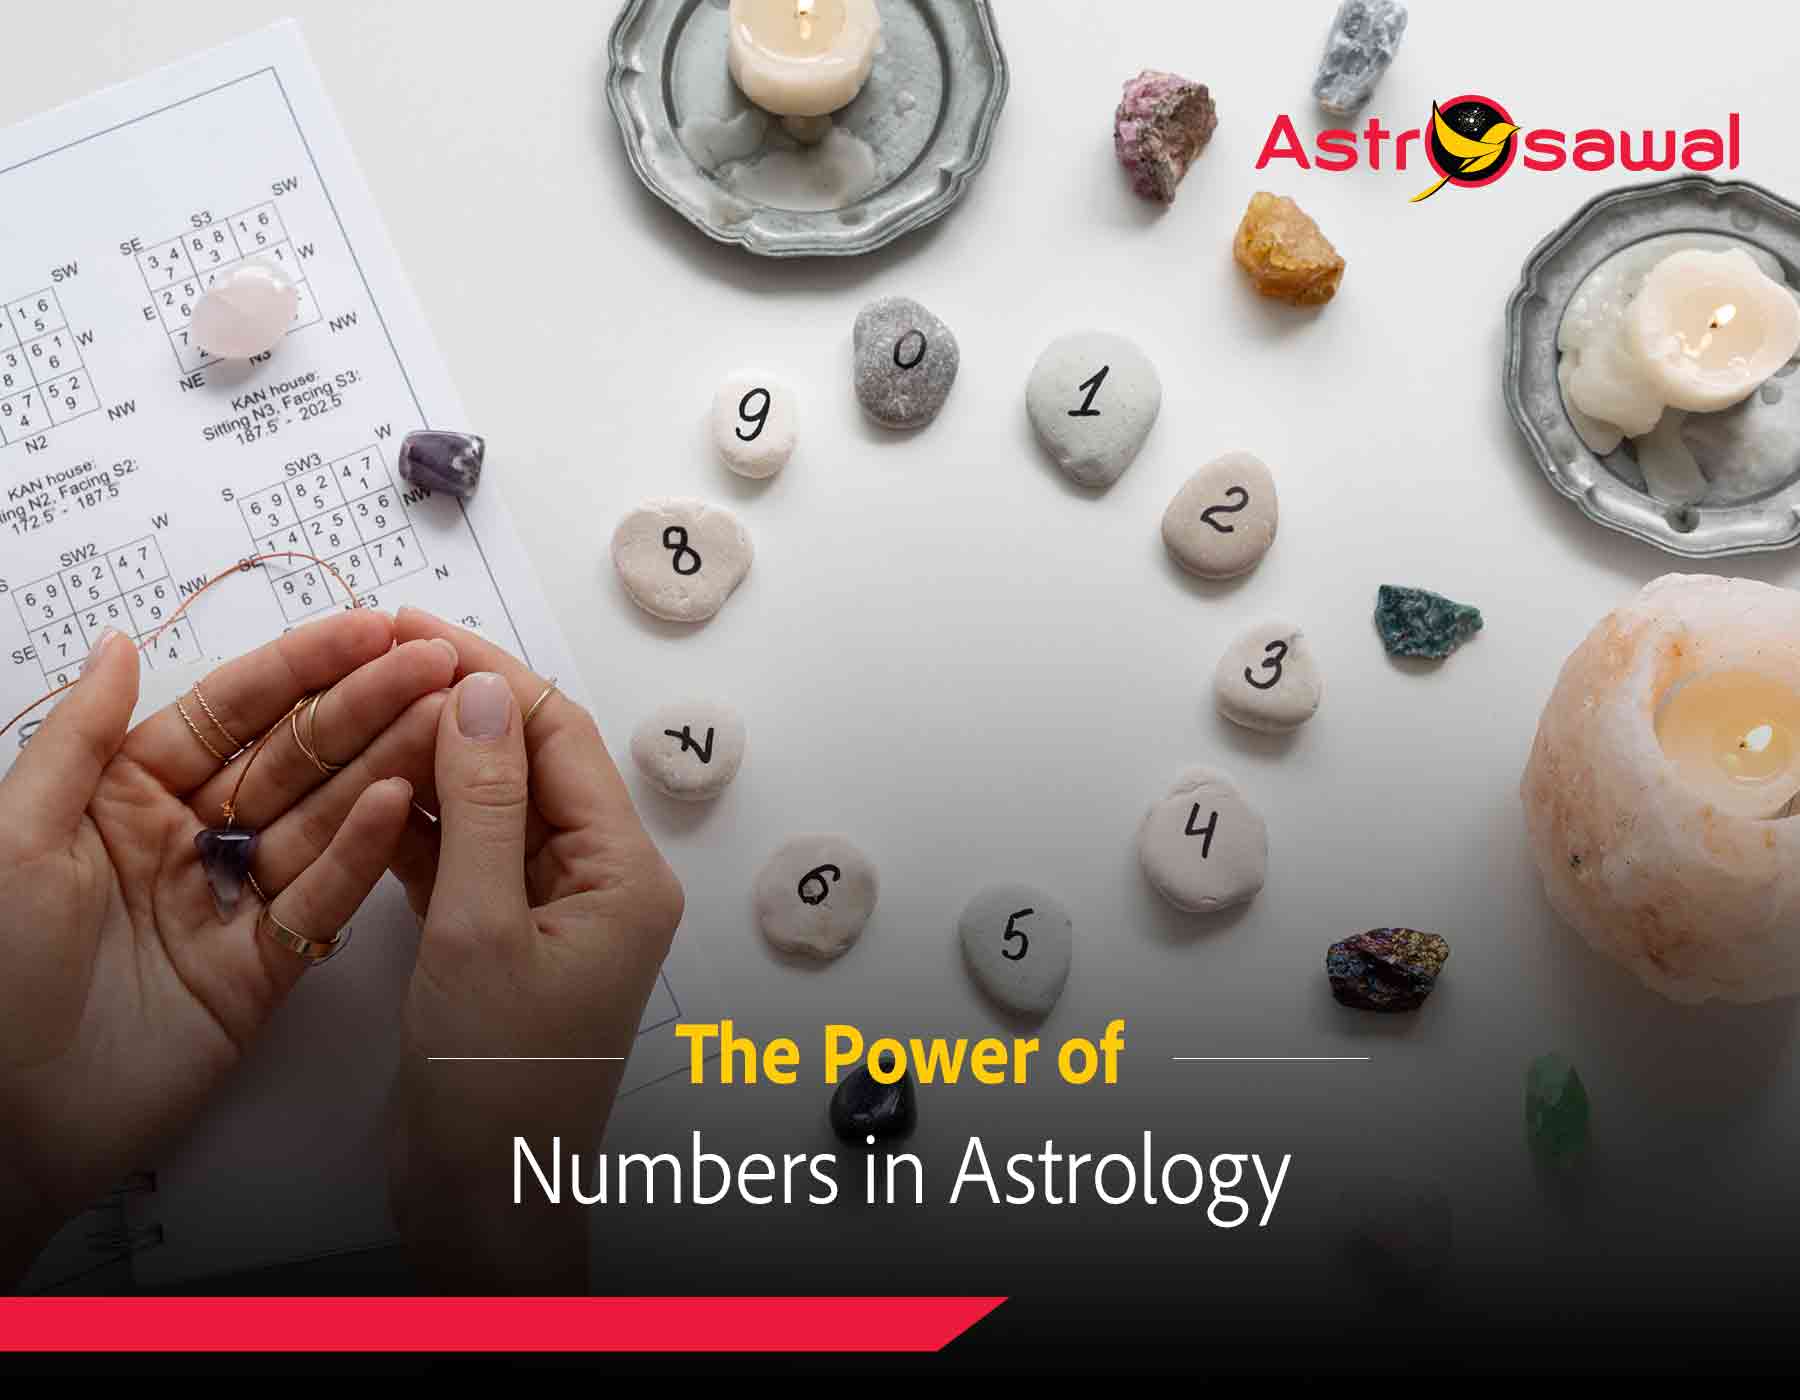 The Power of Numbers in Astrology: Finding Your Lucky Number by Zodiac